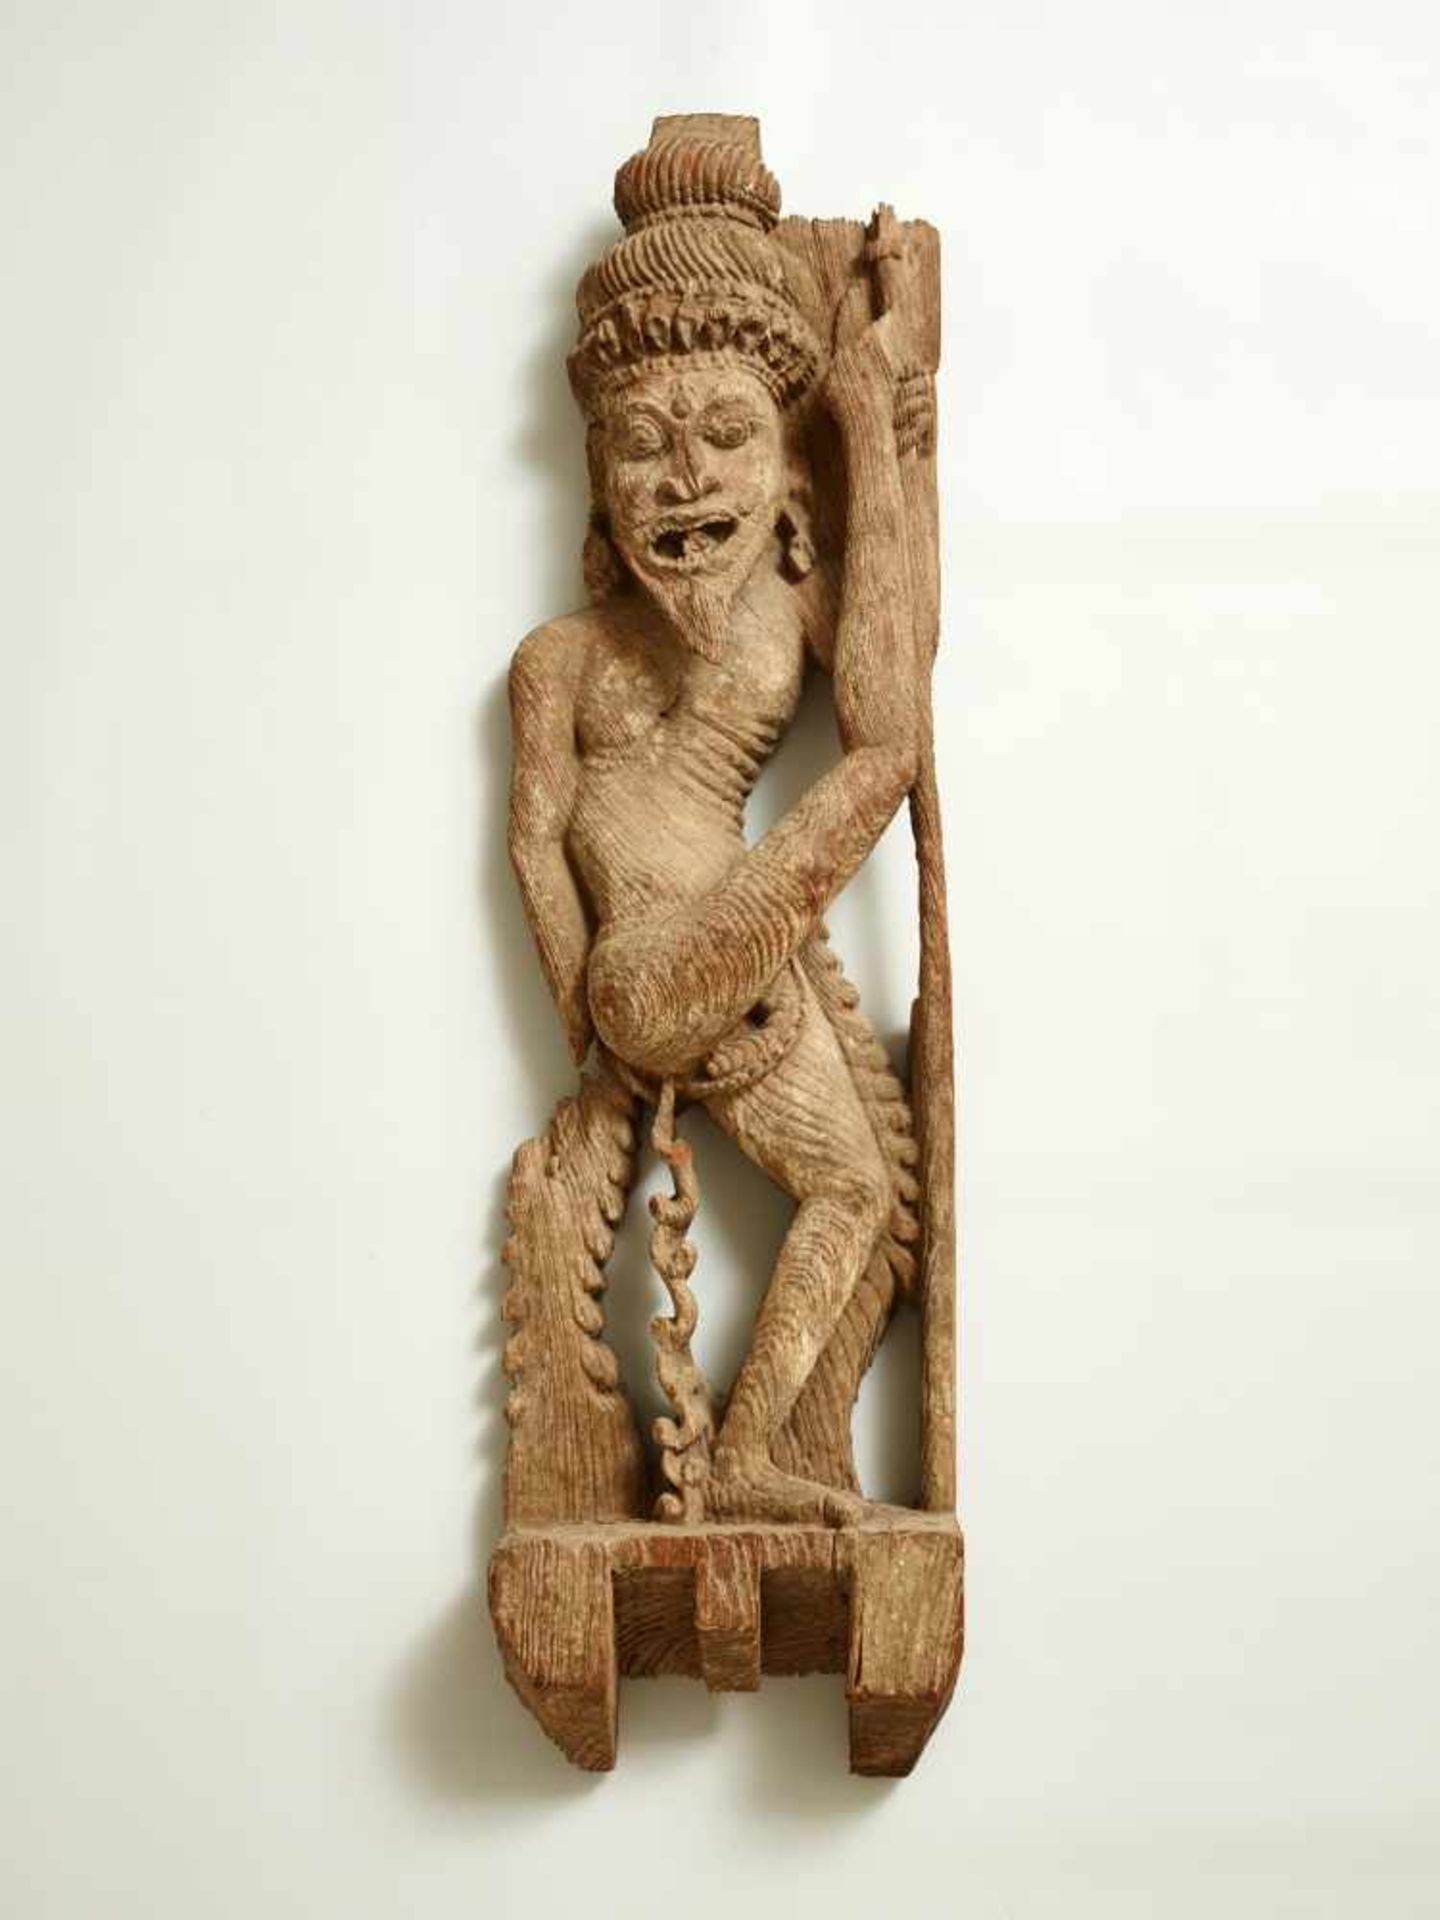 A LARGE AND RARE TAMIL NADU WOOD RELIEF OF THE WISE SAINT RSHIWood relief India, Tamil Nadu, approx.